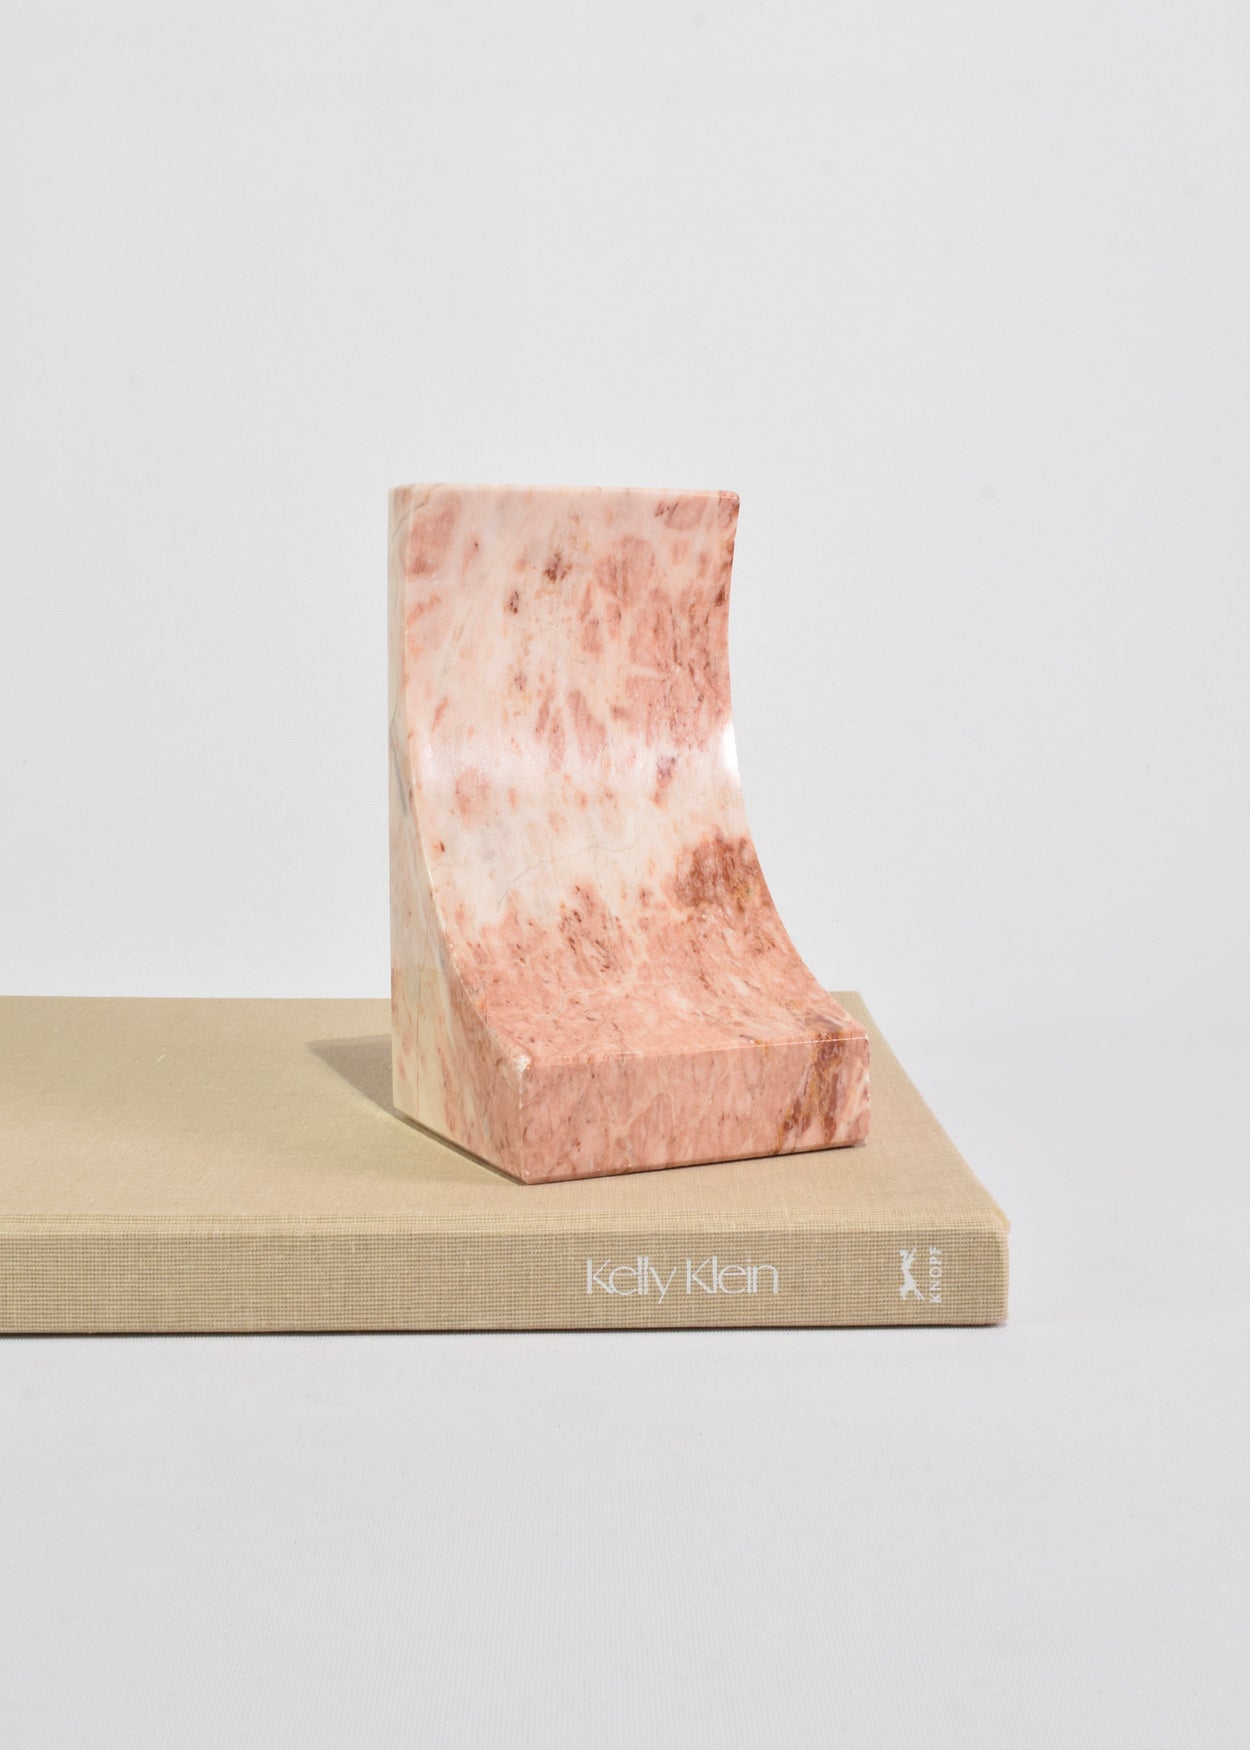 Curved Pink Marble Bookends